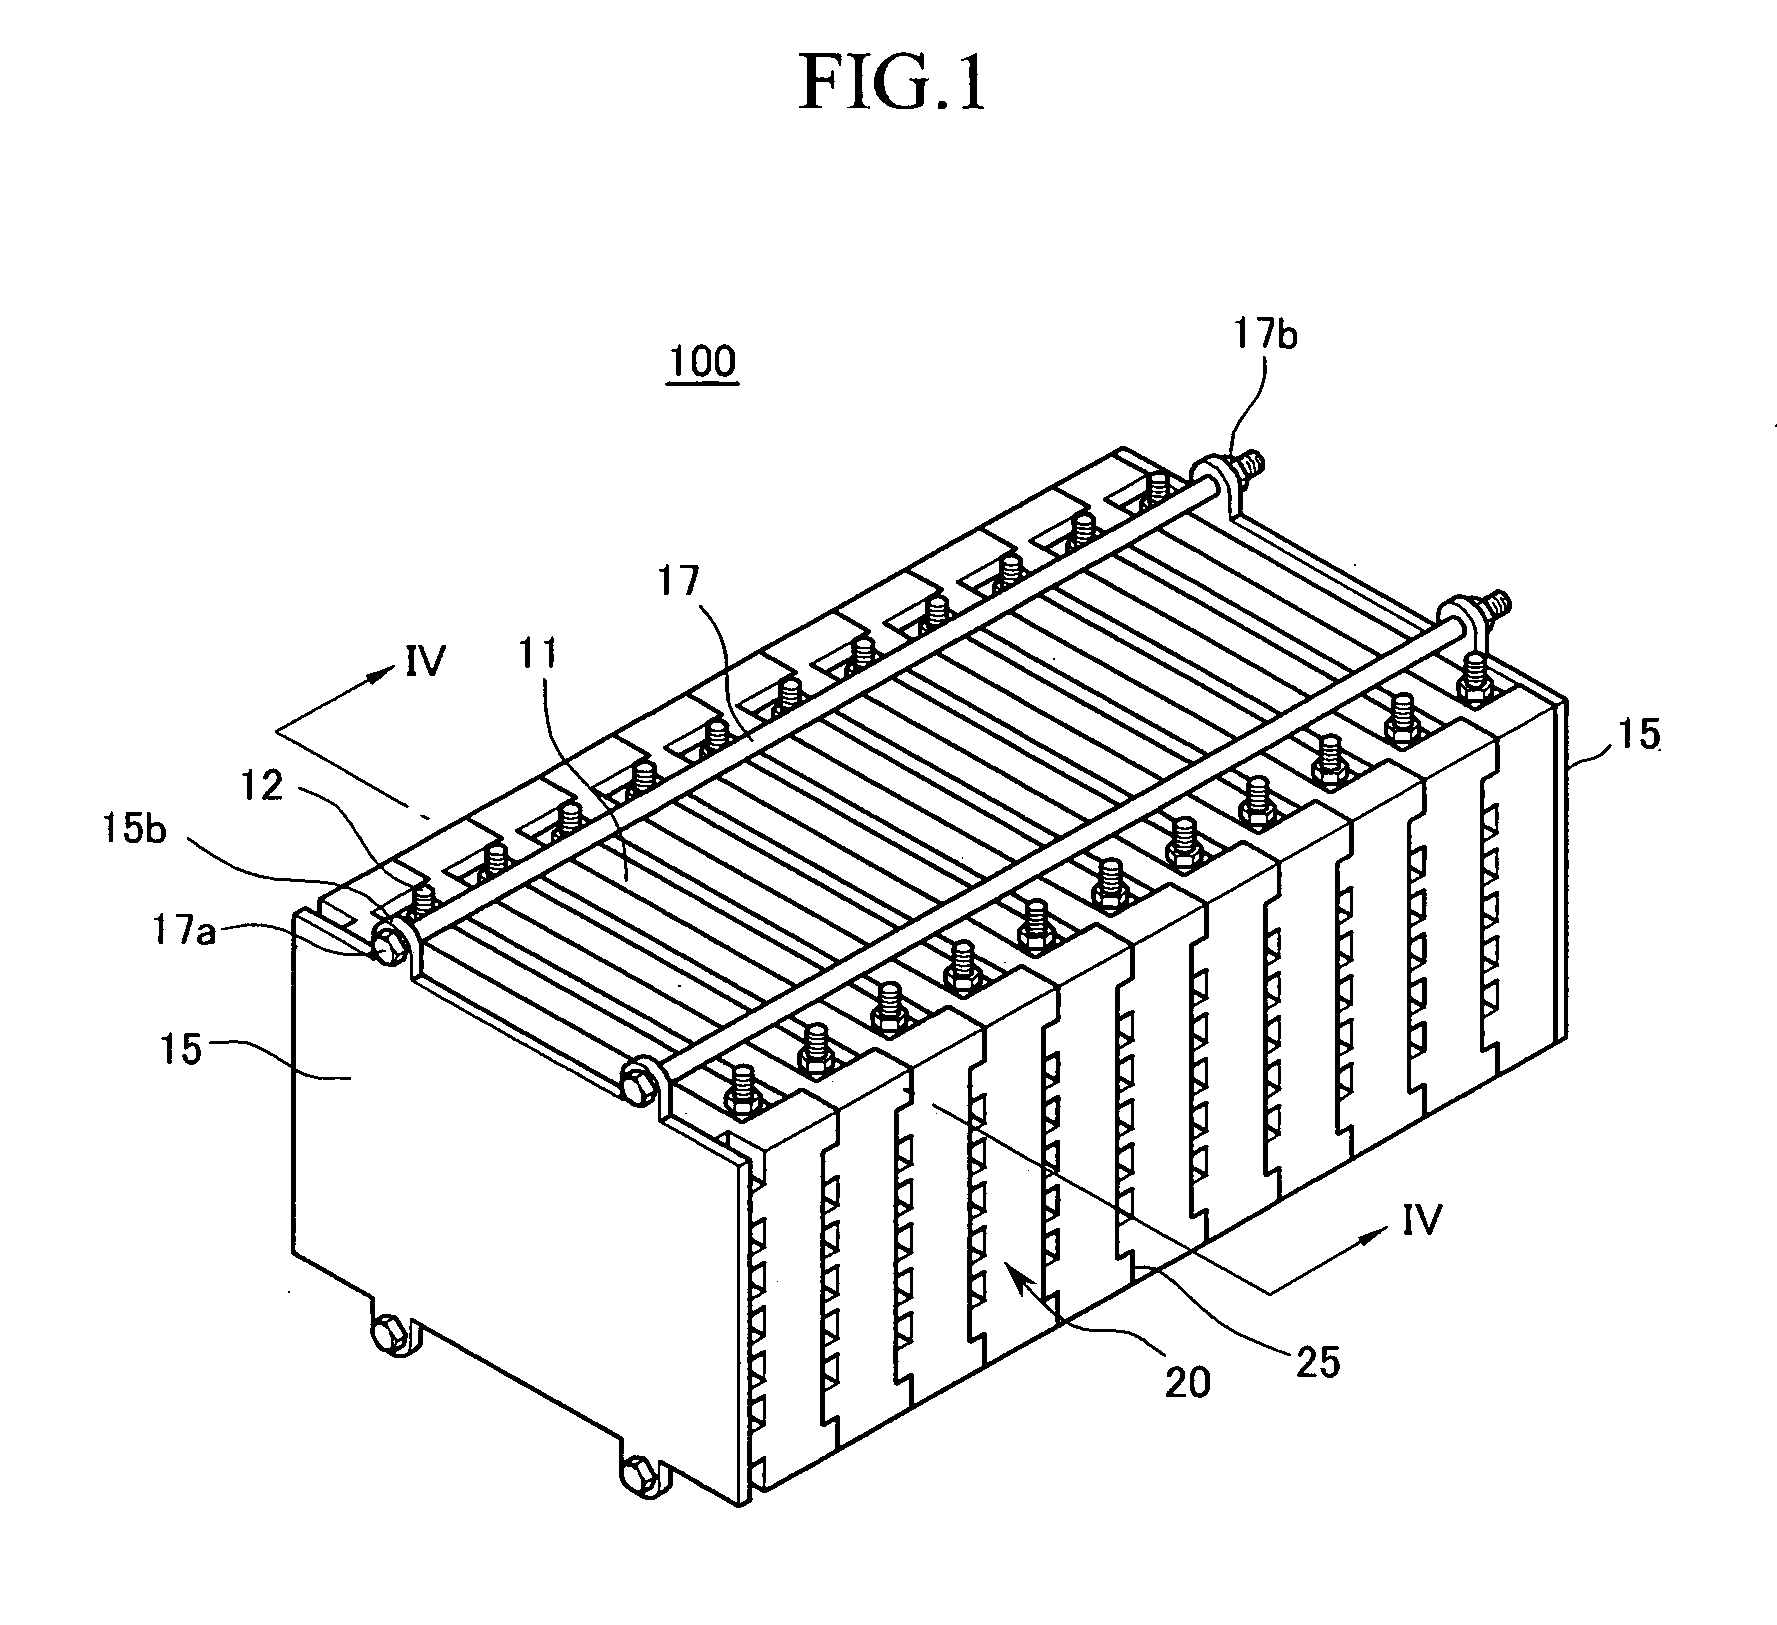 Battery module with improved cell barrier between unit cells